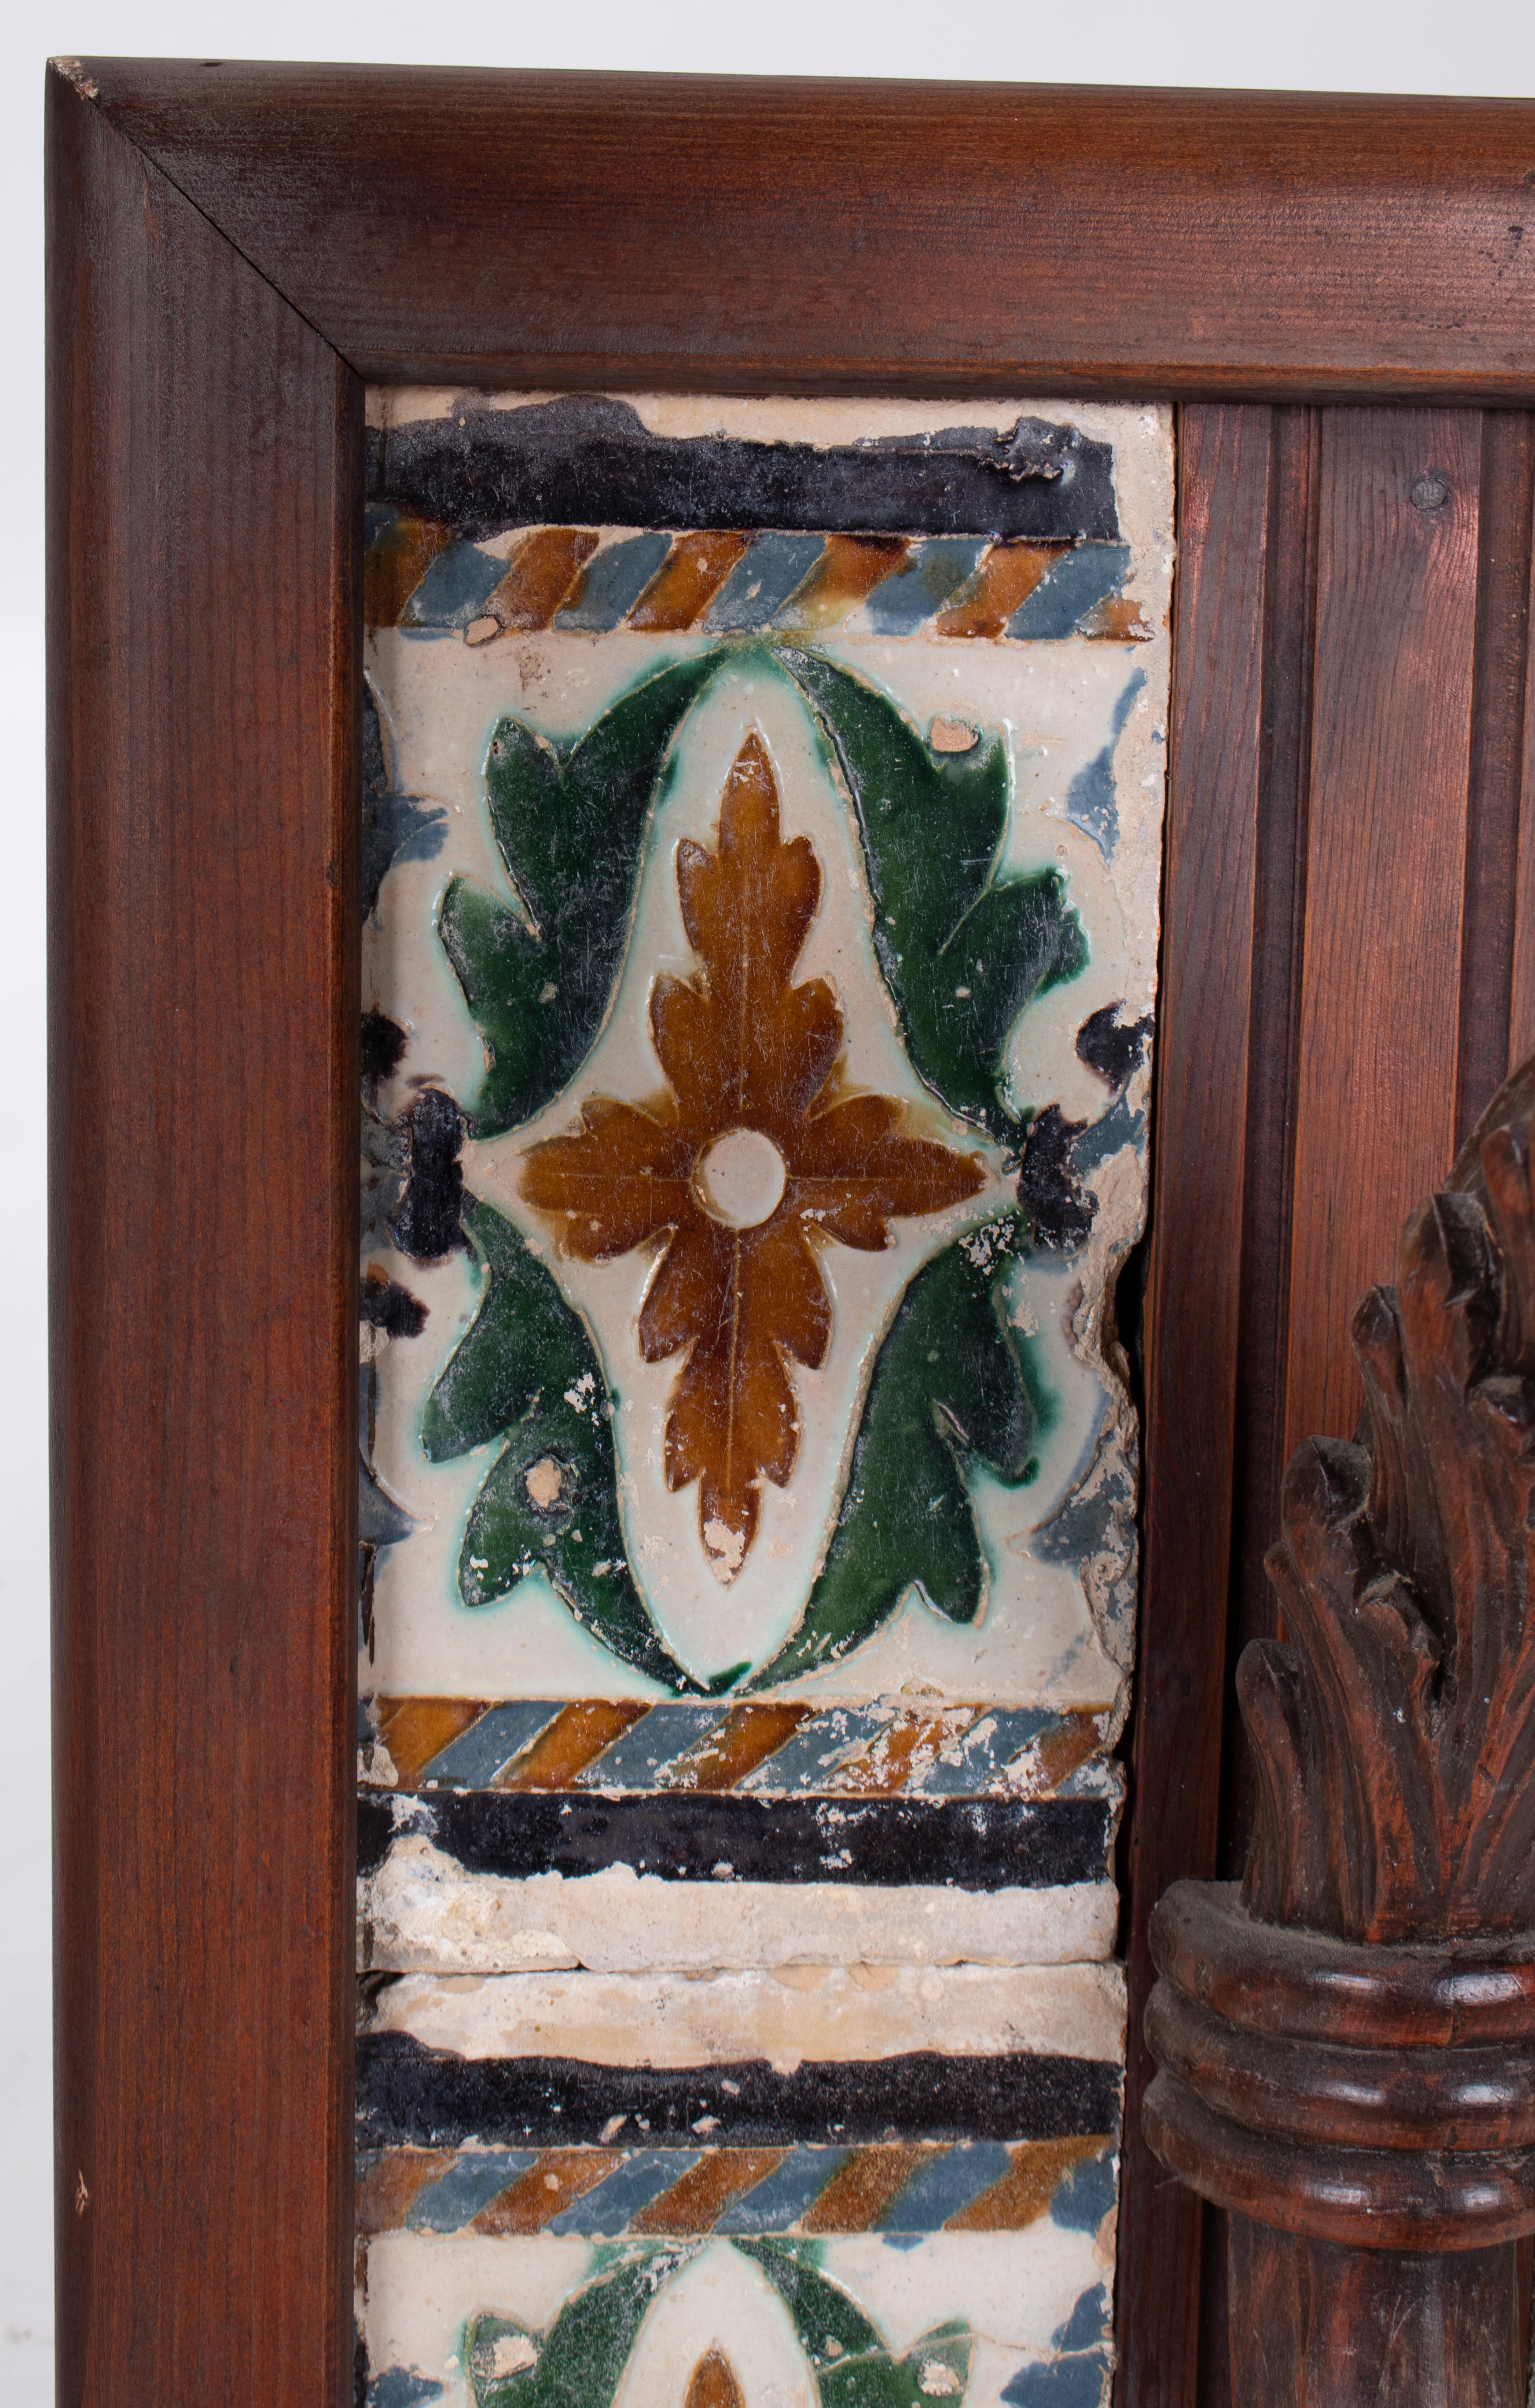 19th Century Pair of Spanish Wall Lamps with 16th Century Cuerda Seca Tiles 3